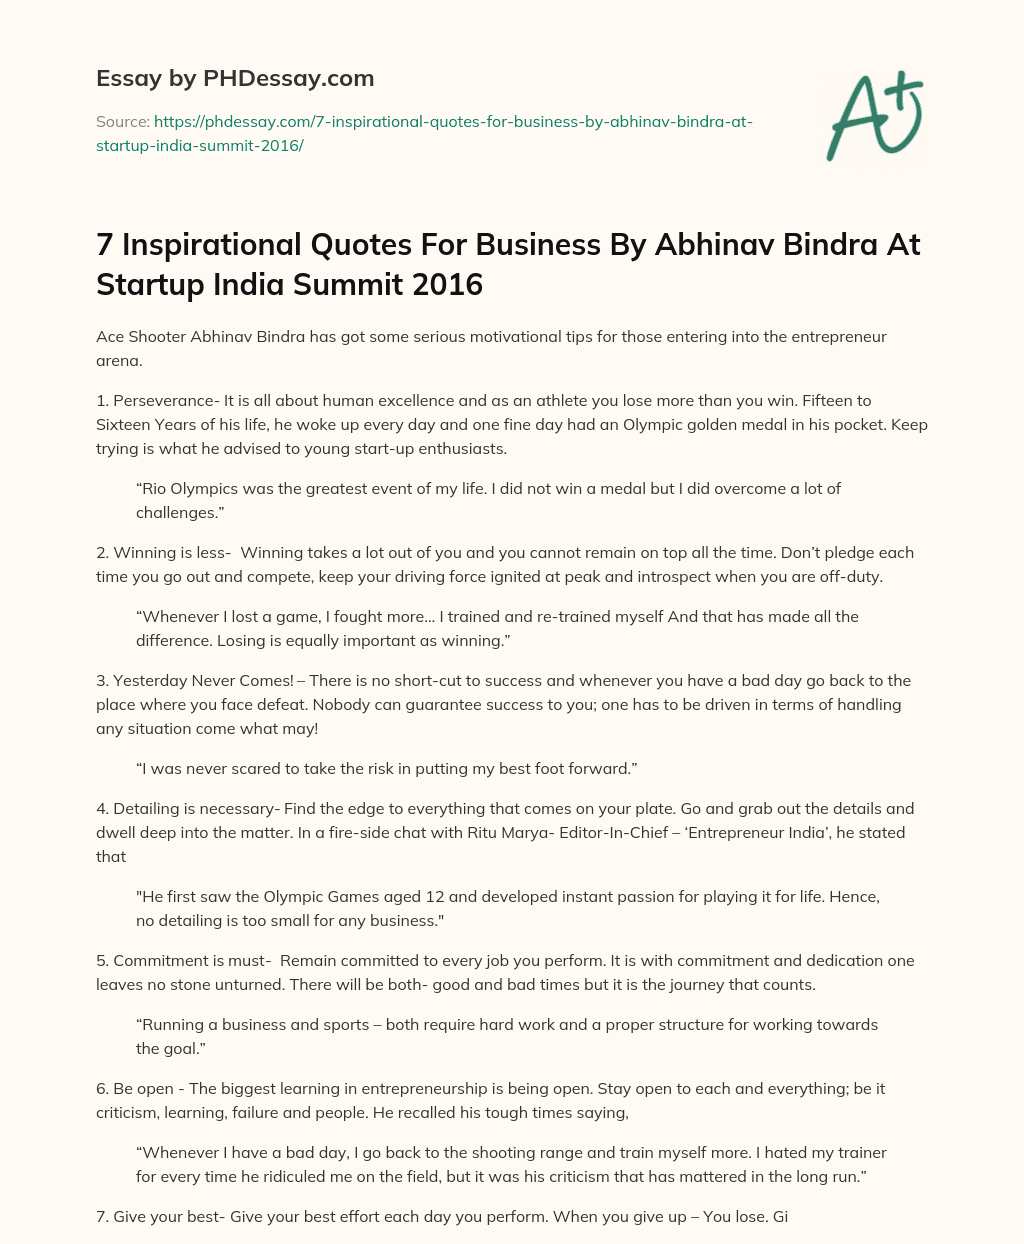 7 Inspirational Quotes For Business By Abhinav Bindra At Startup India Summit 2016 essay